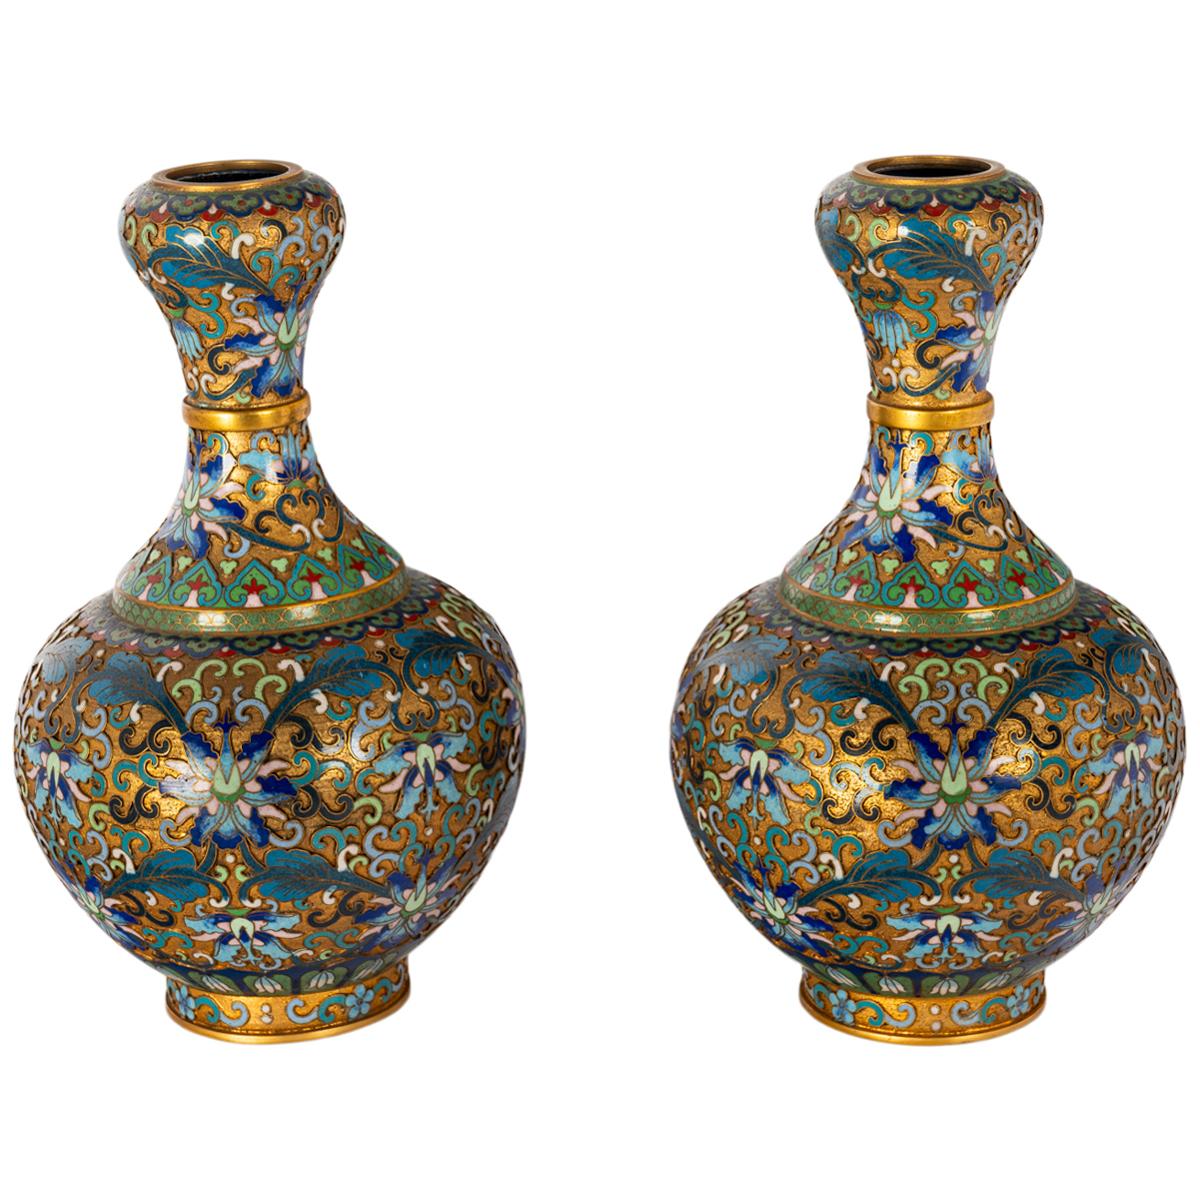 cloisonne and champleve